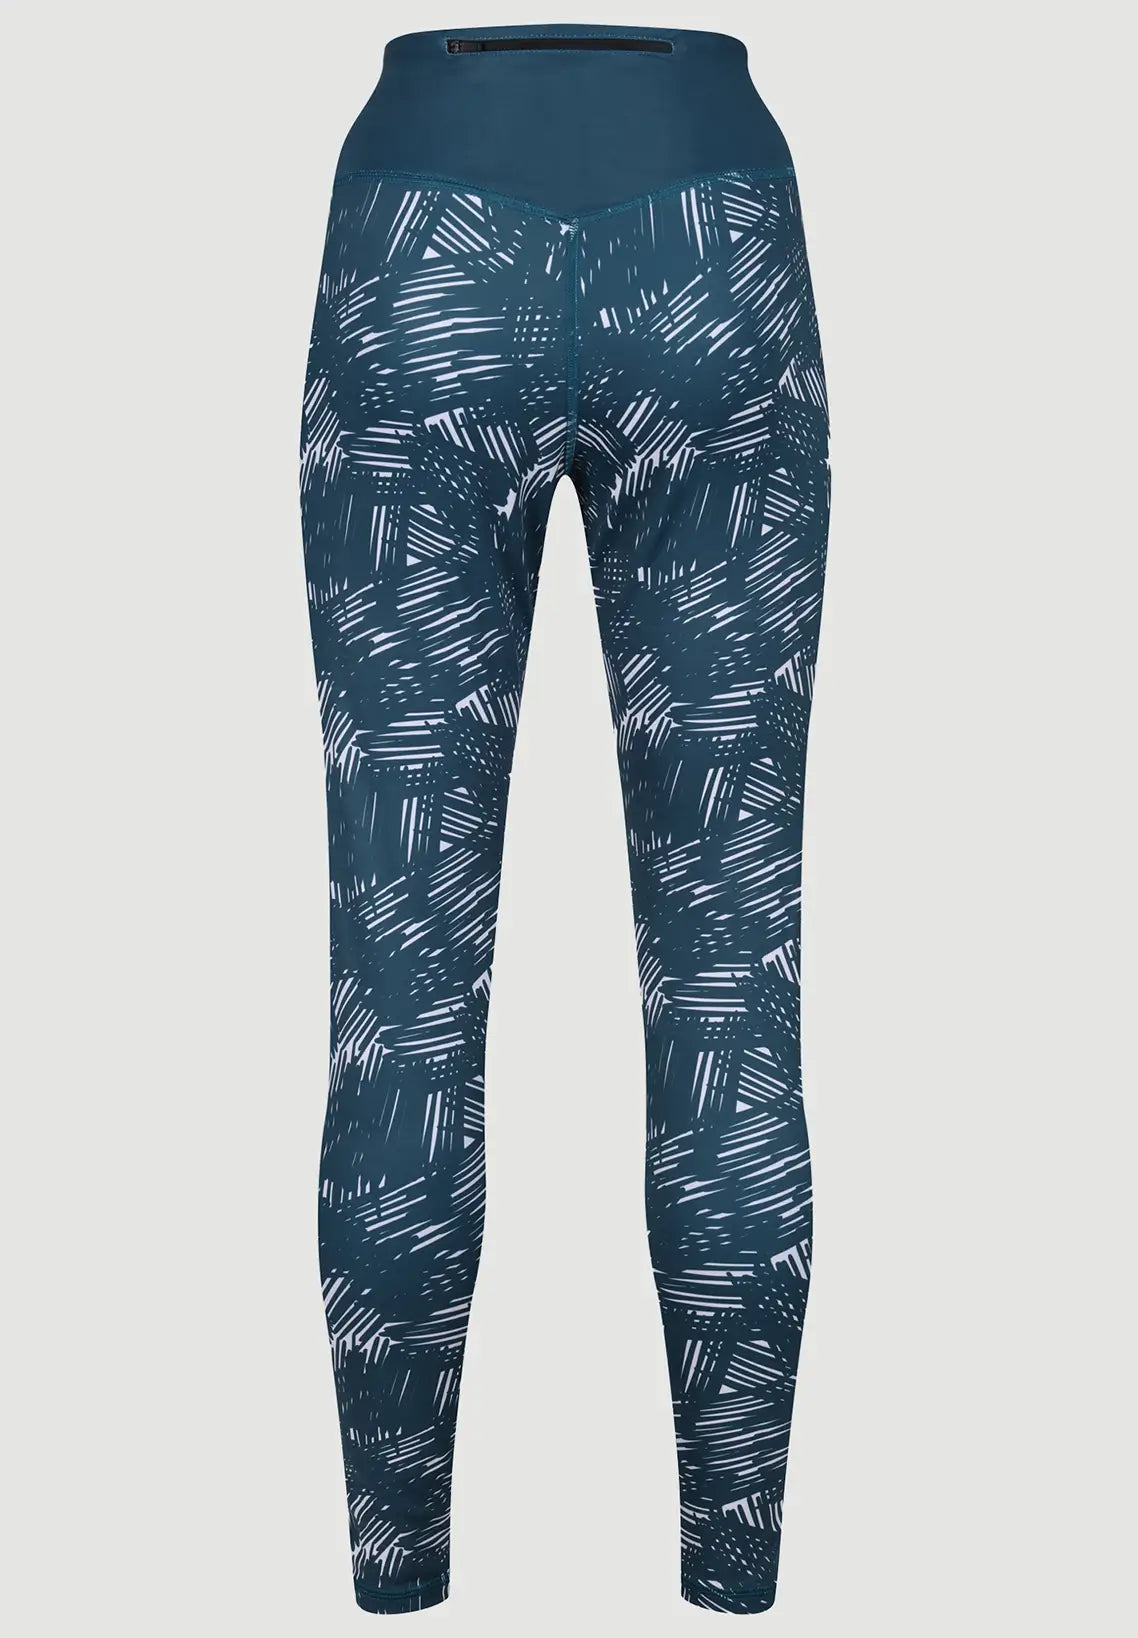 High Waisted Gym Leggings For Women - LC Active Elevate